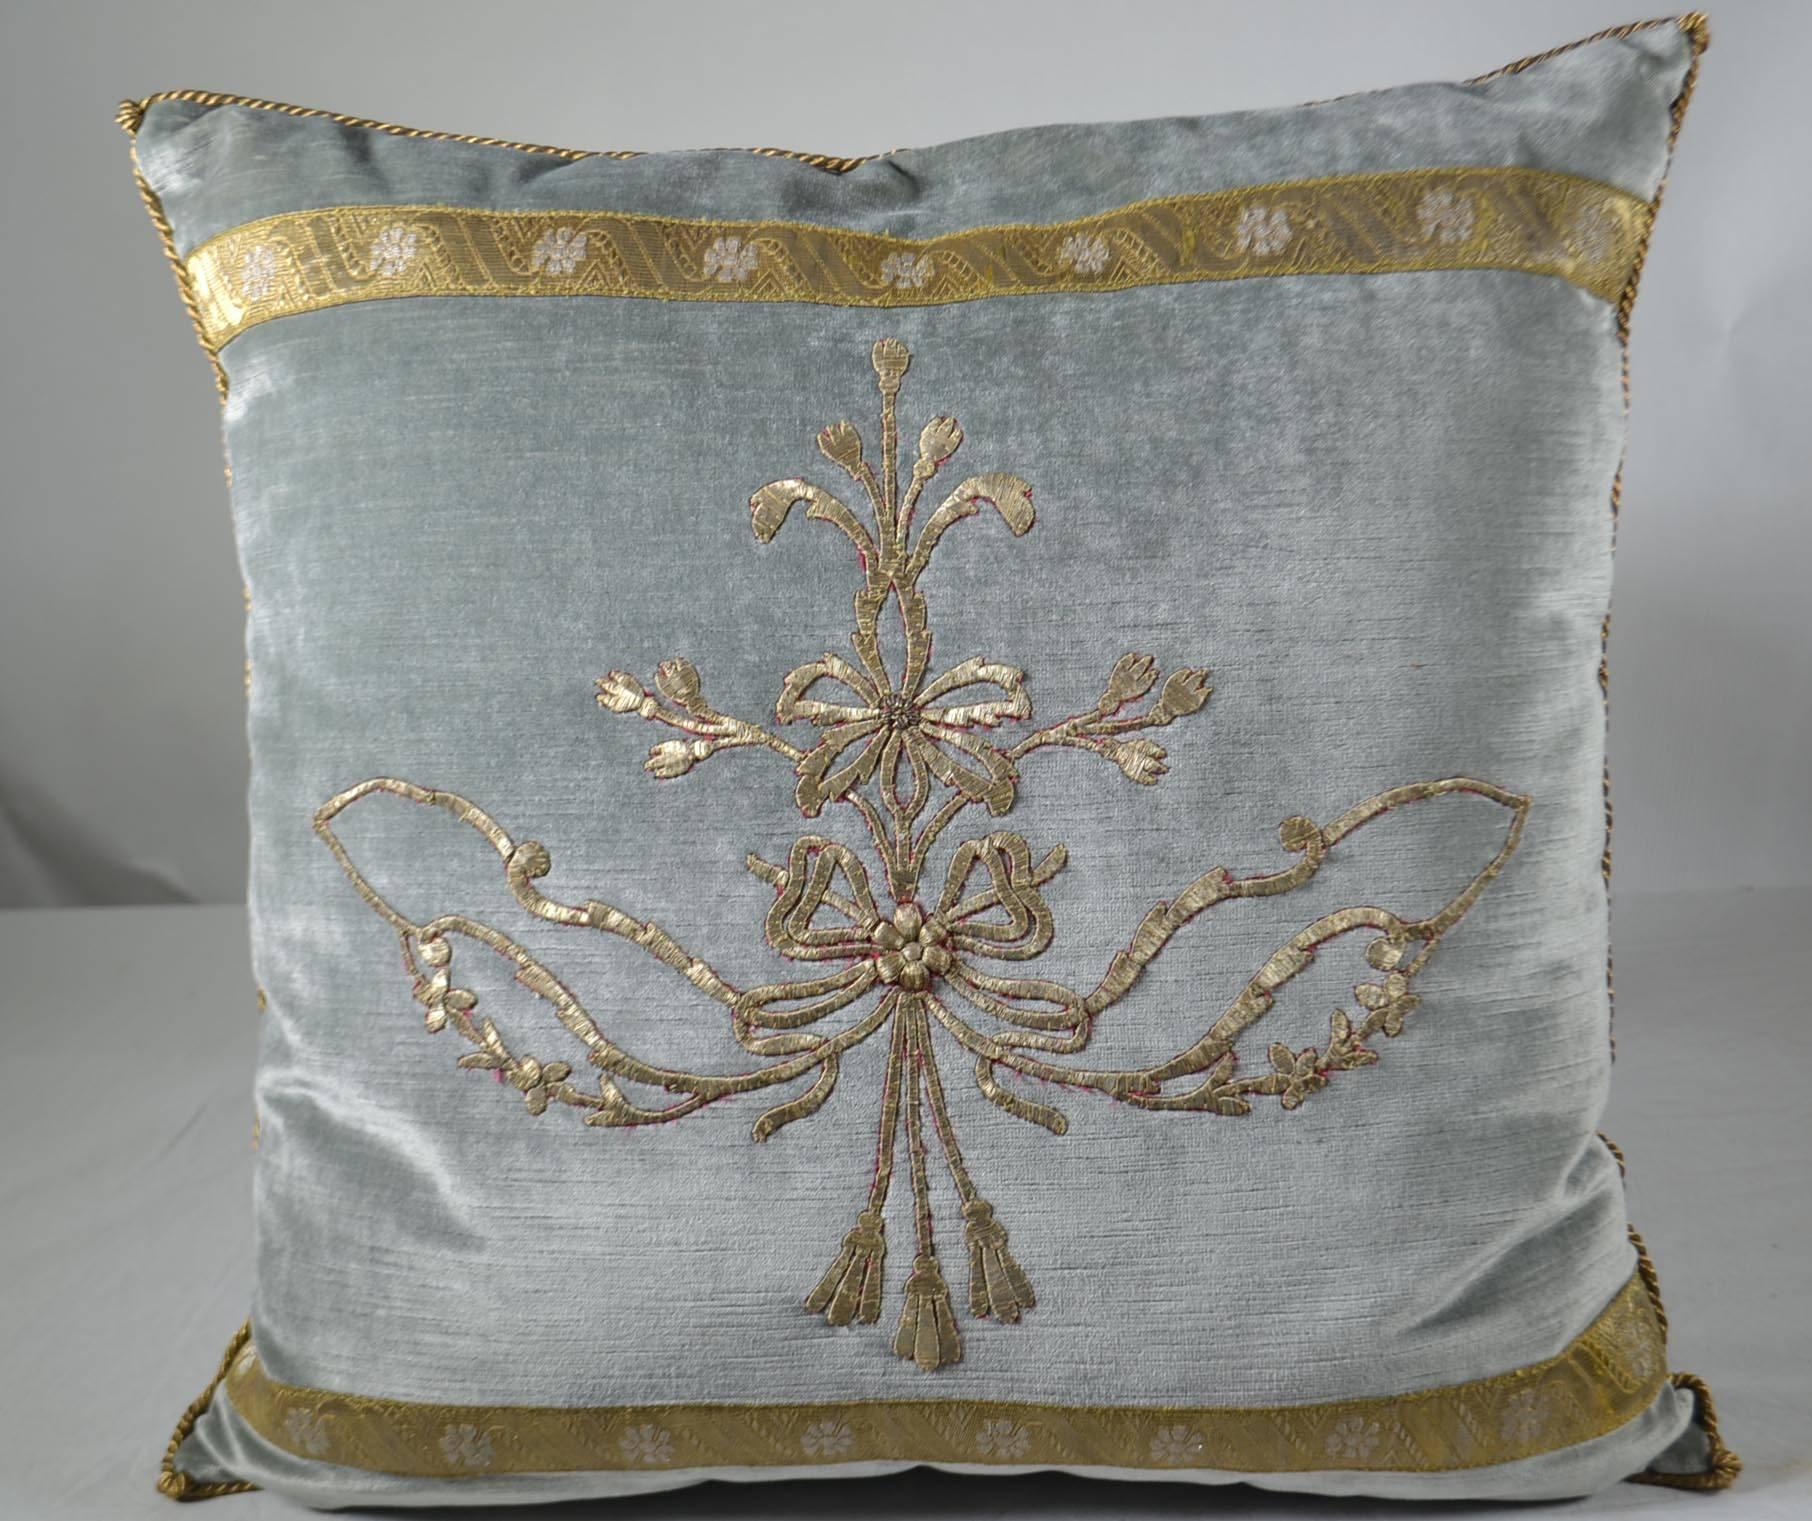 Antique Ottoman Empire raised gold metallic embroidery border with special antique gold metallic gallon with silver flowers on pale French blue velvet. Hand trimmed with vintage gold metallic cording, knotted in the corners. Down filled.